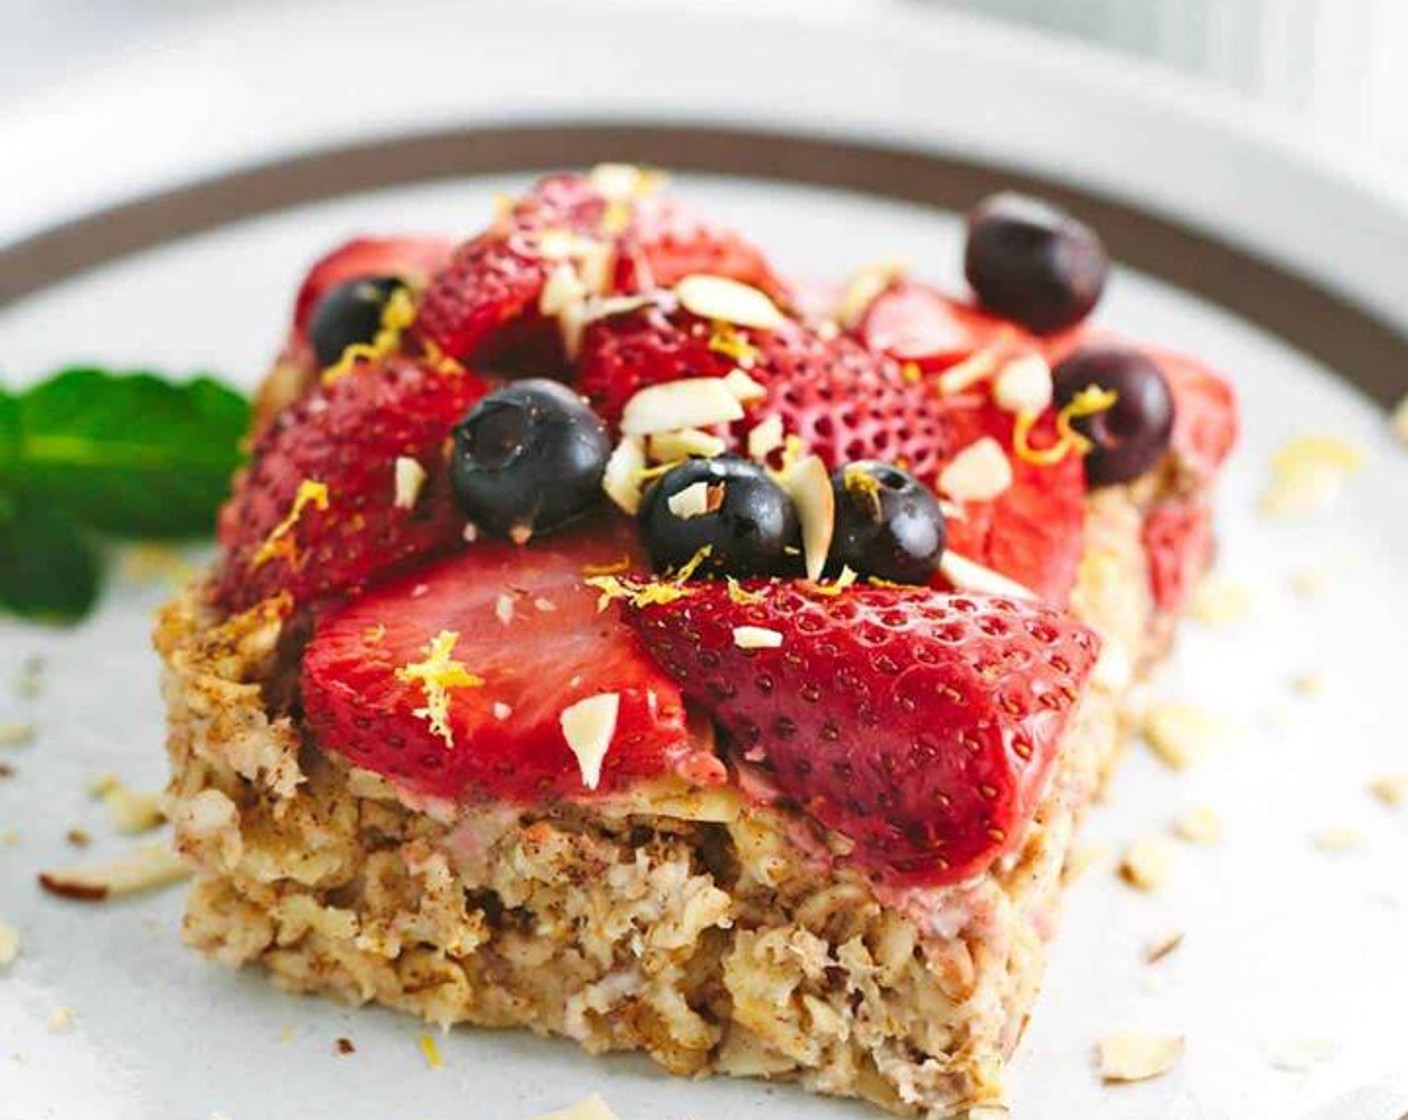 Baked Almond Oatmeal with Berry Topping